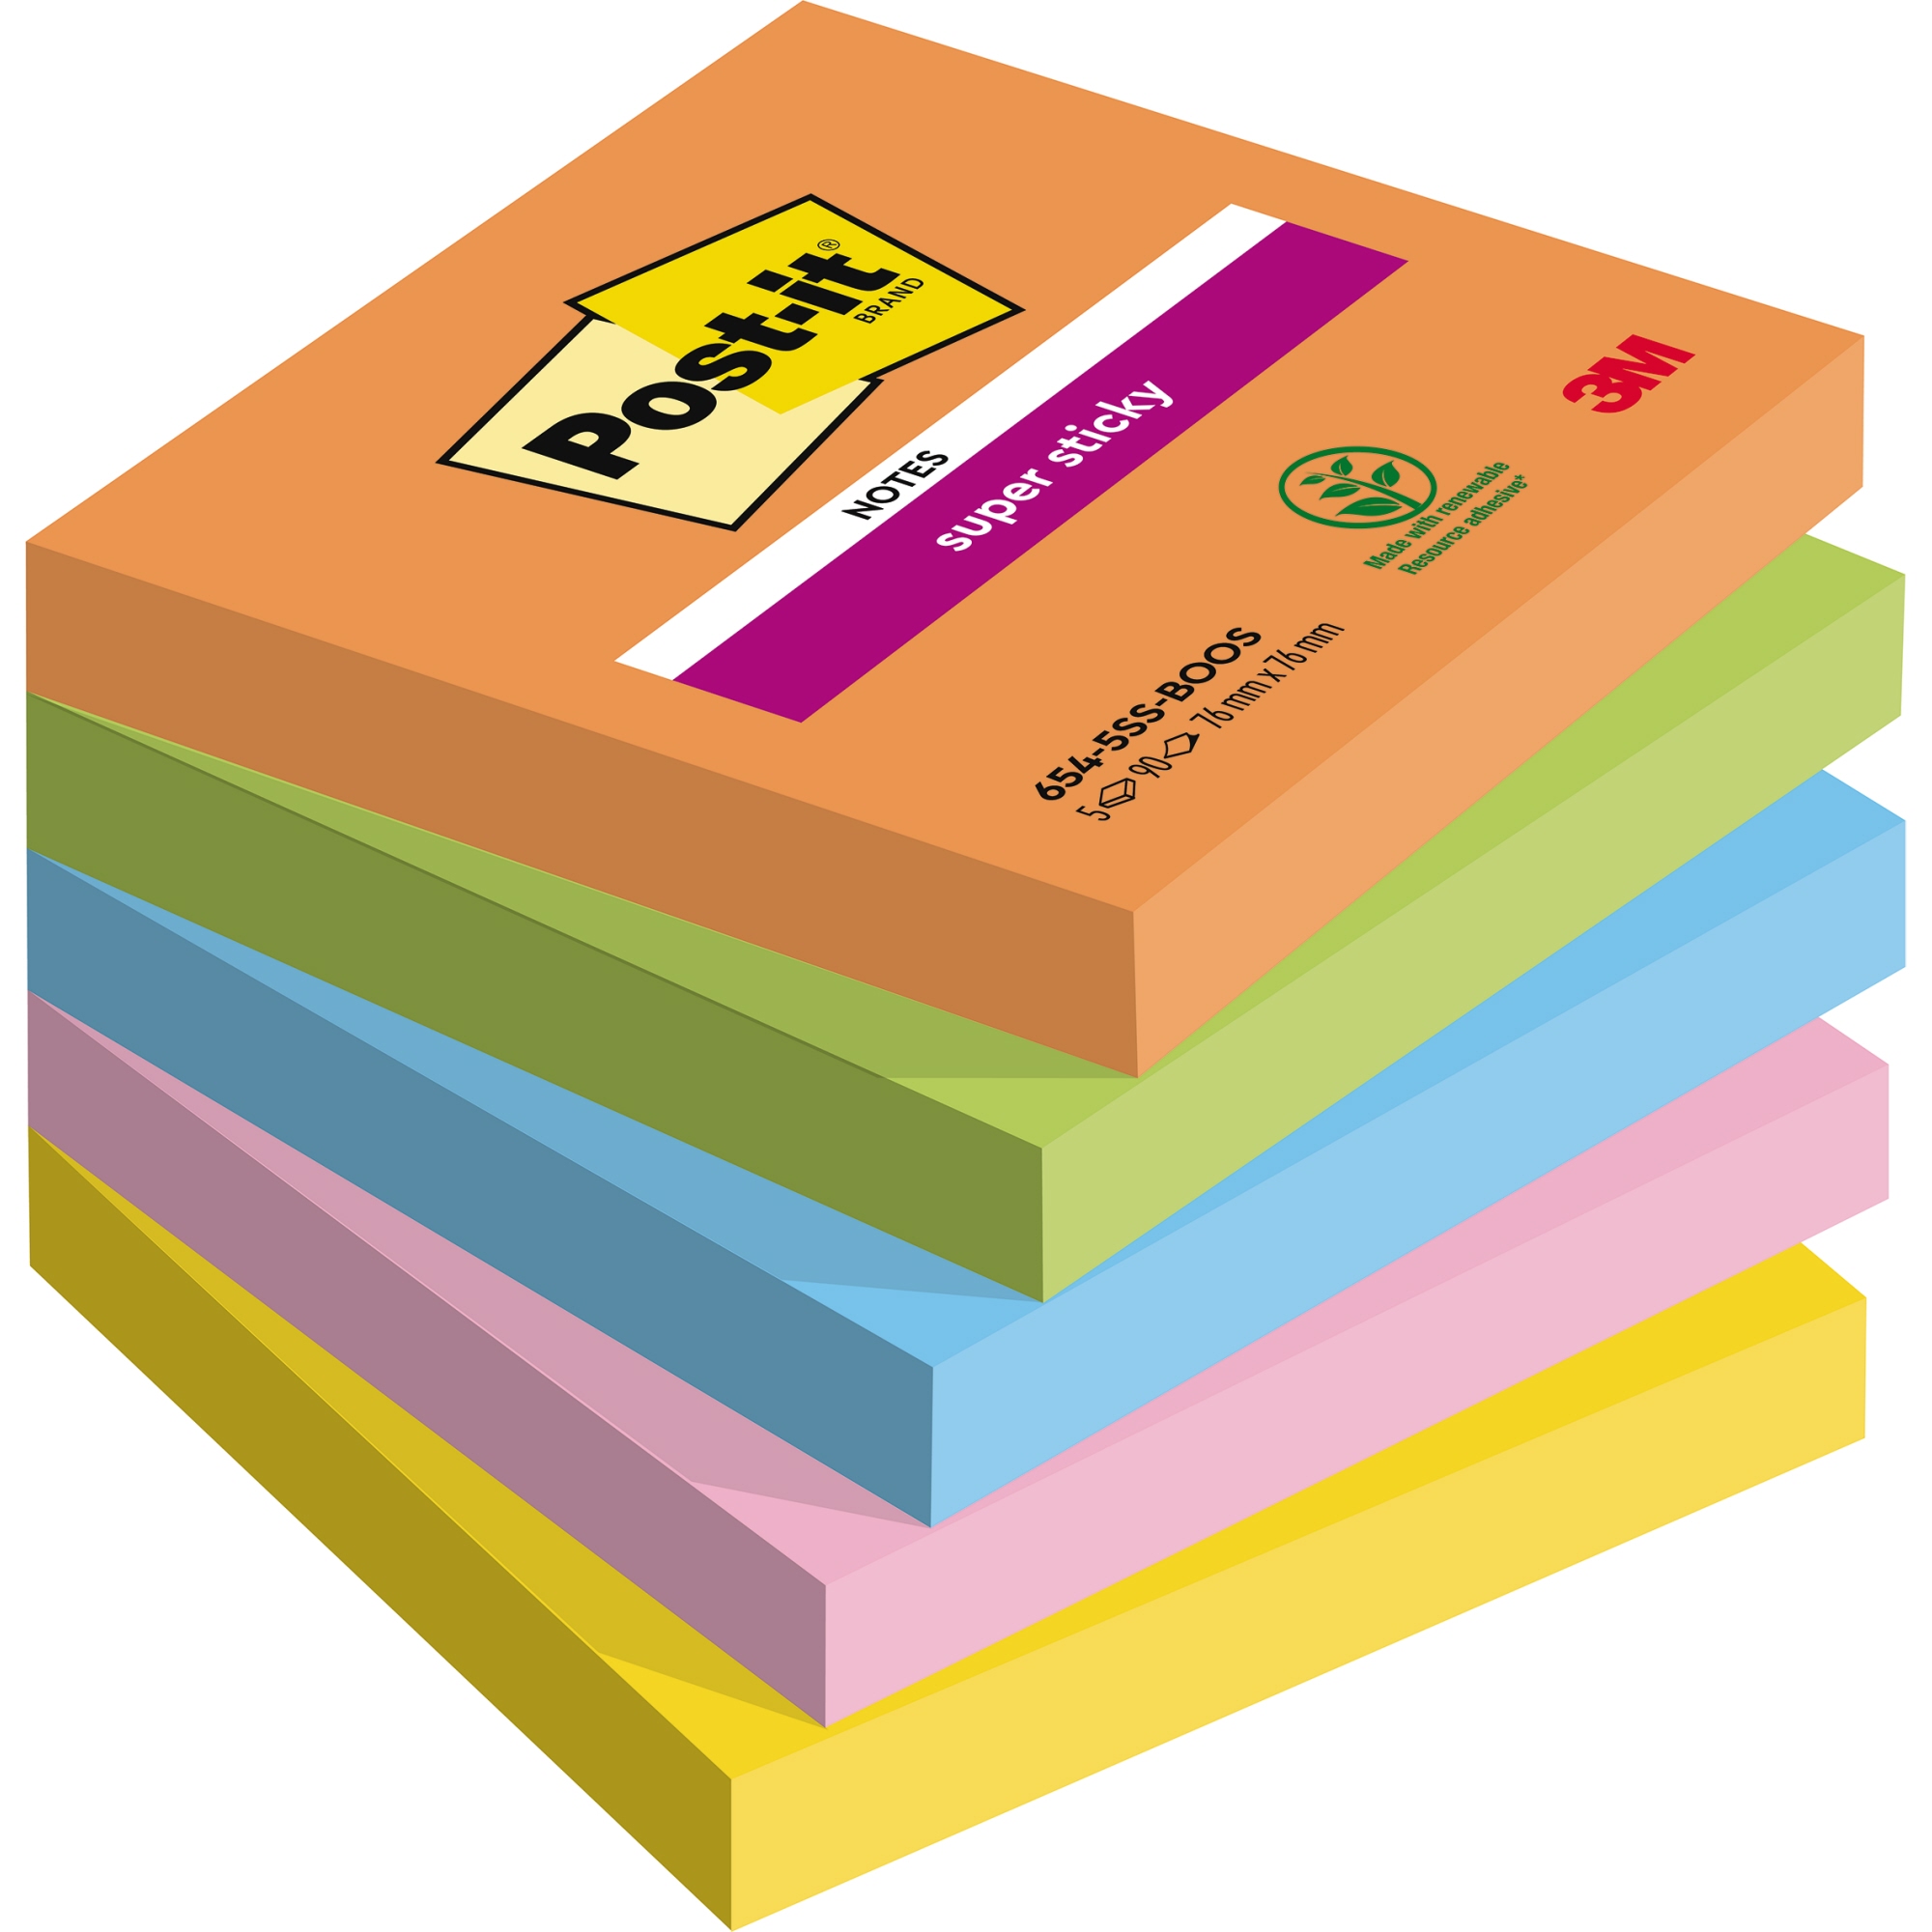 Post-it® Haftnotiz Super Sticky Notes Boost Collection 5 Block/Pack.